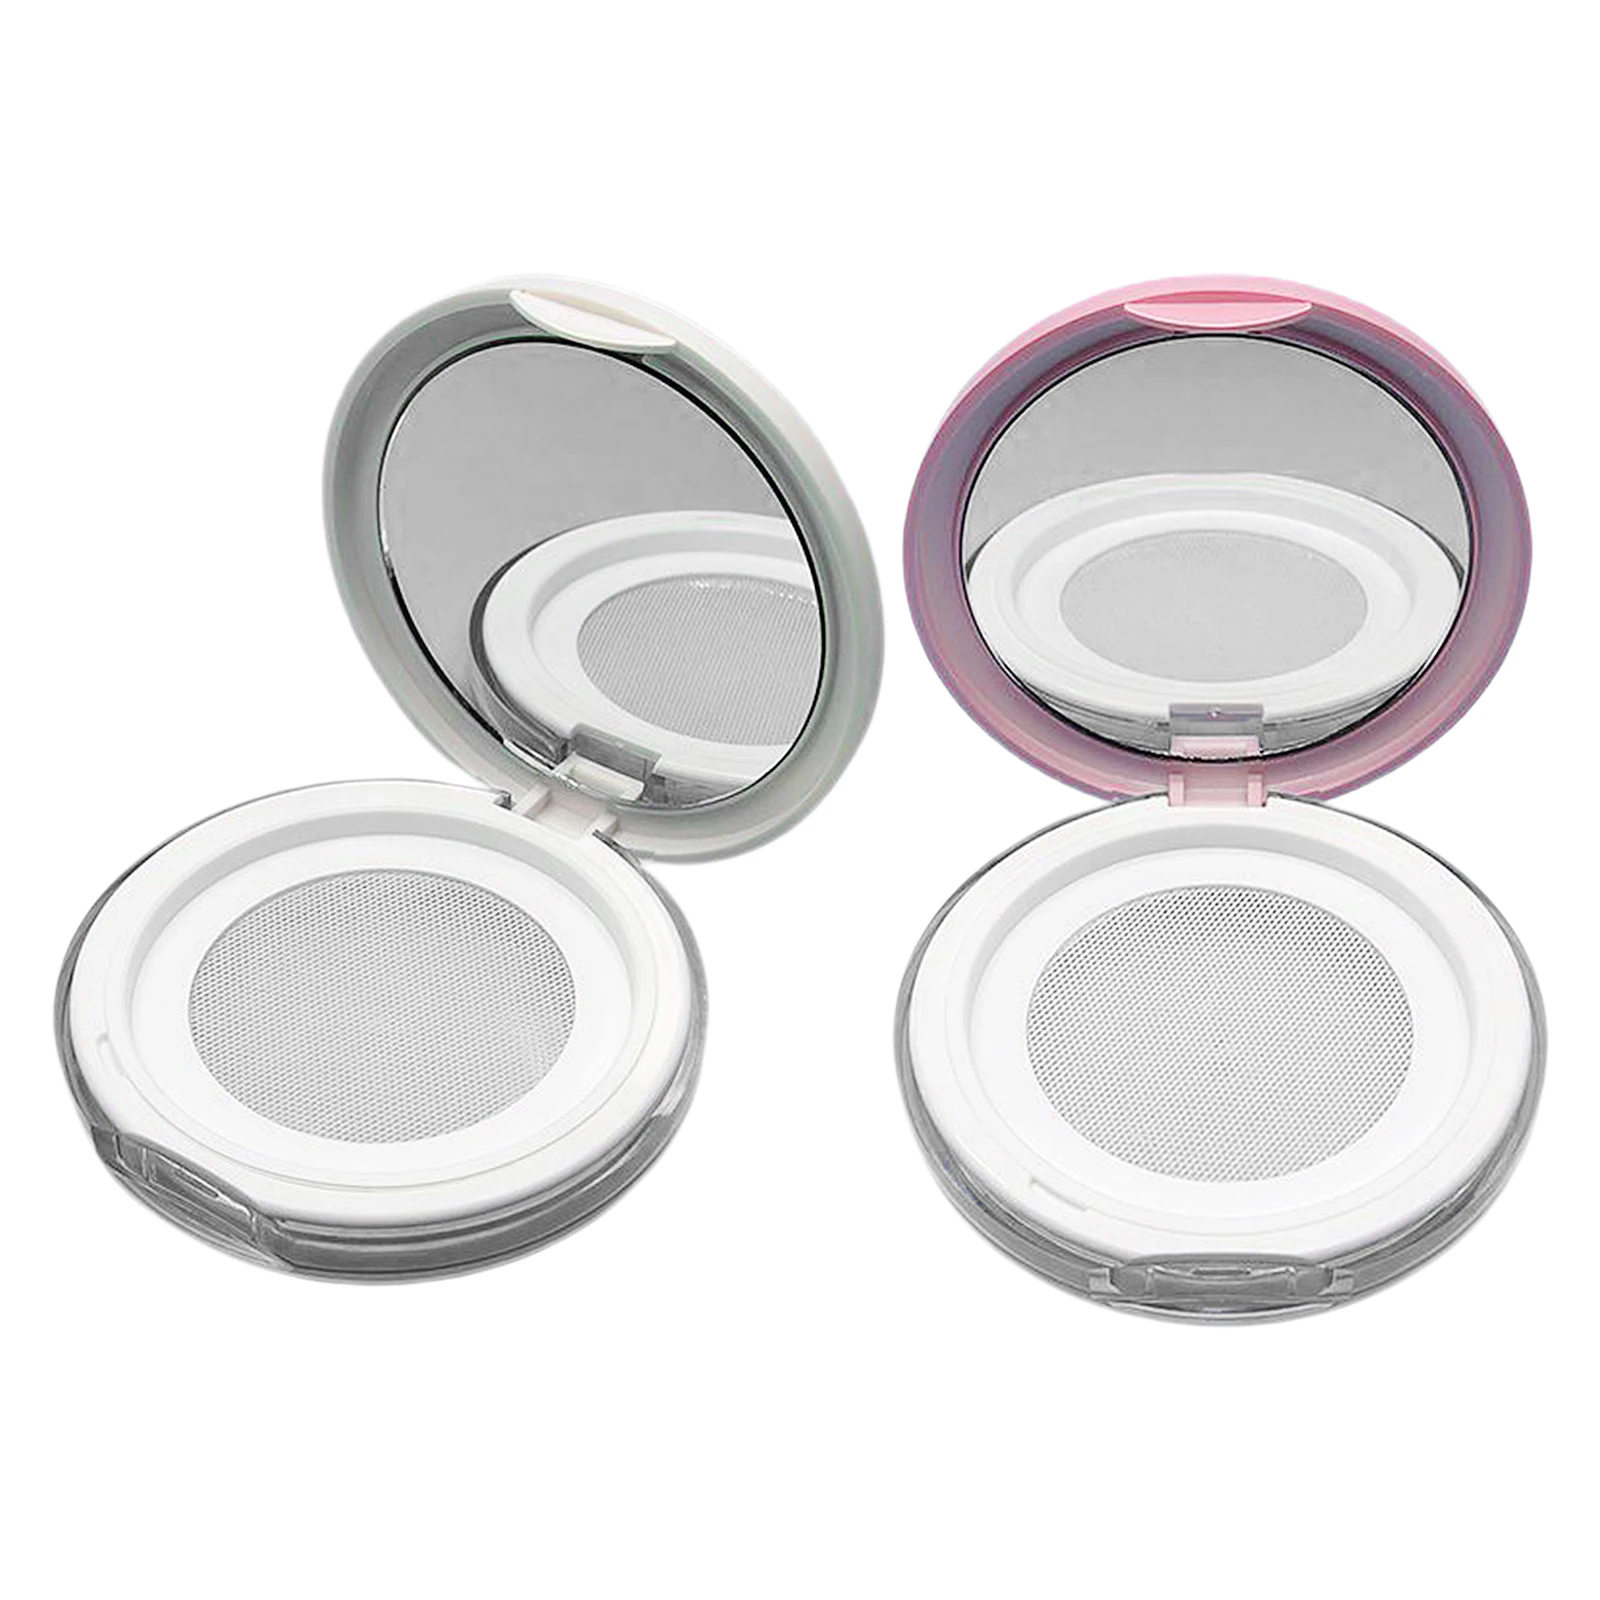 0.1 oz Reusable Plastic Loose Powder Container DIY Travel Kit with Mirror